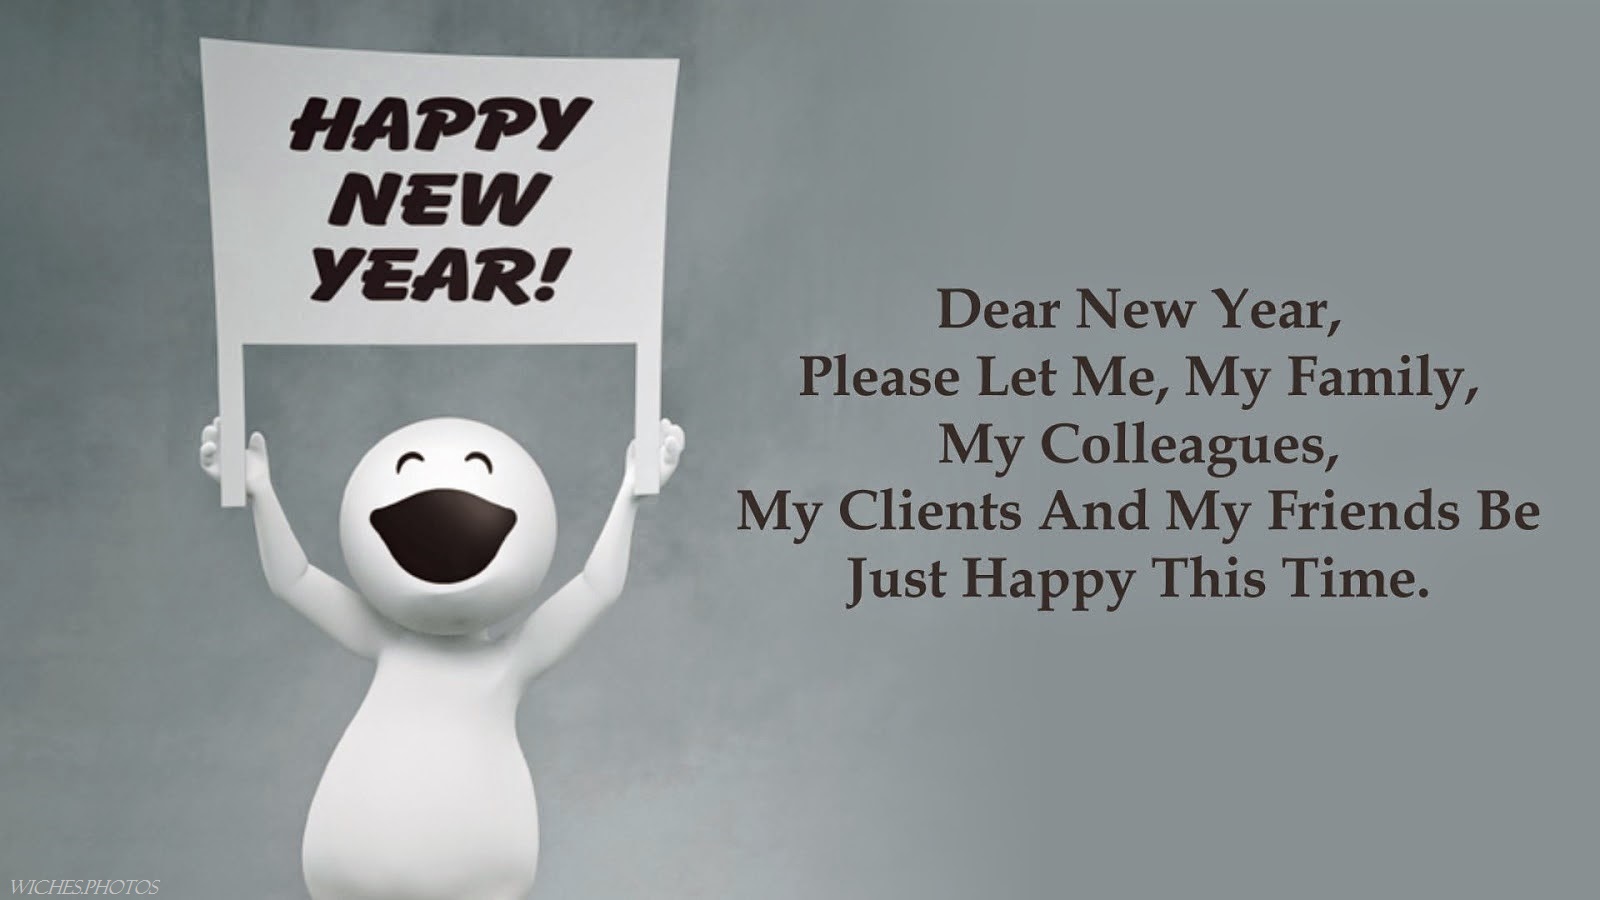 Happy New Year Quotes - Wishes, Messages, SMS 2023 (500+ Quotes) - 2023